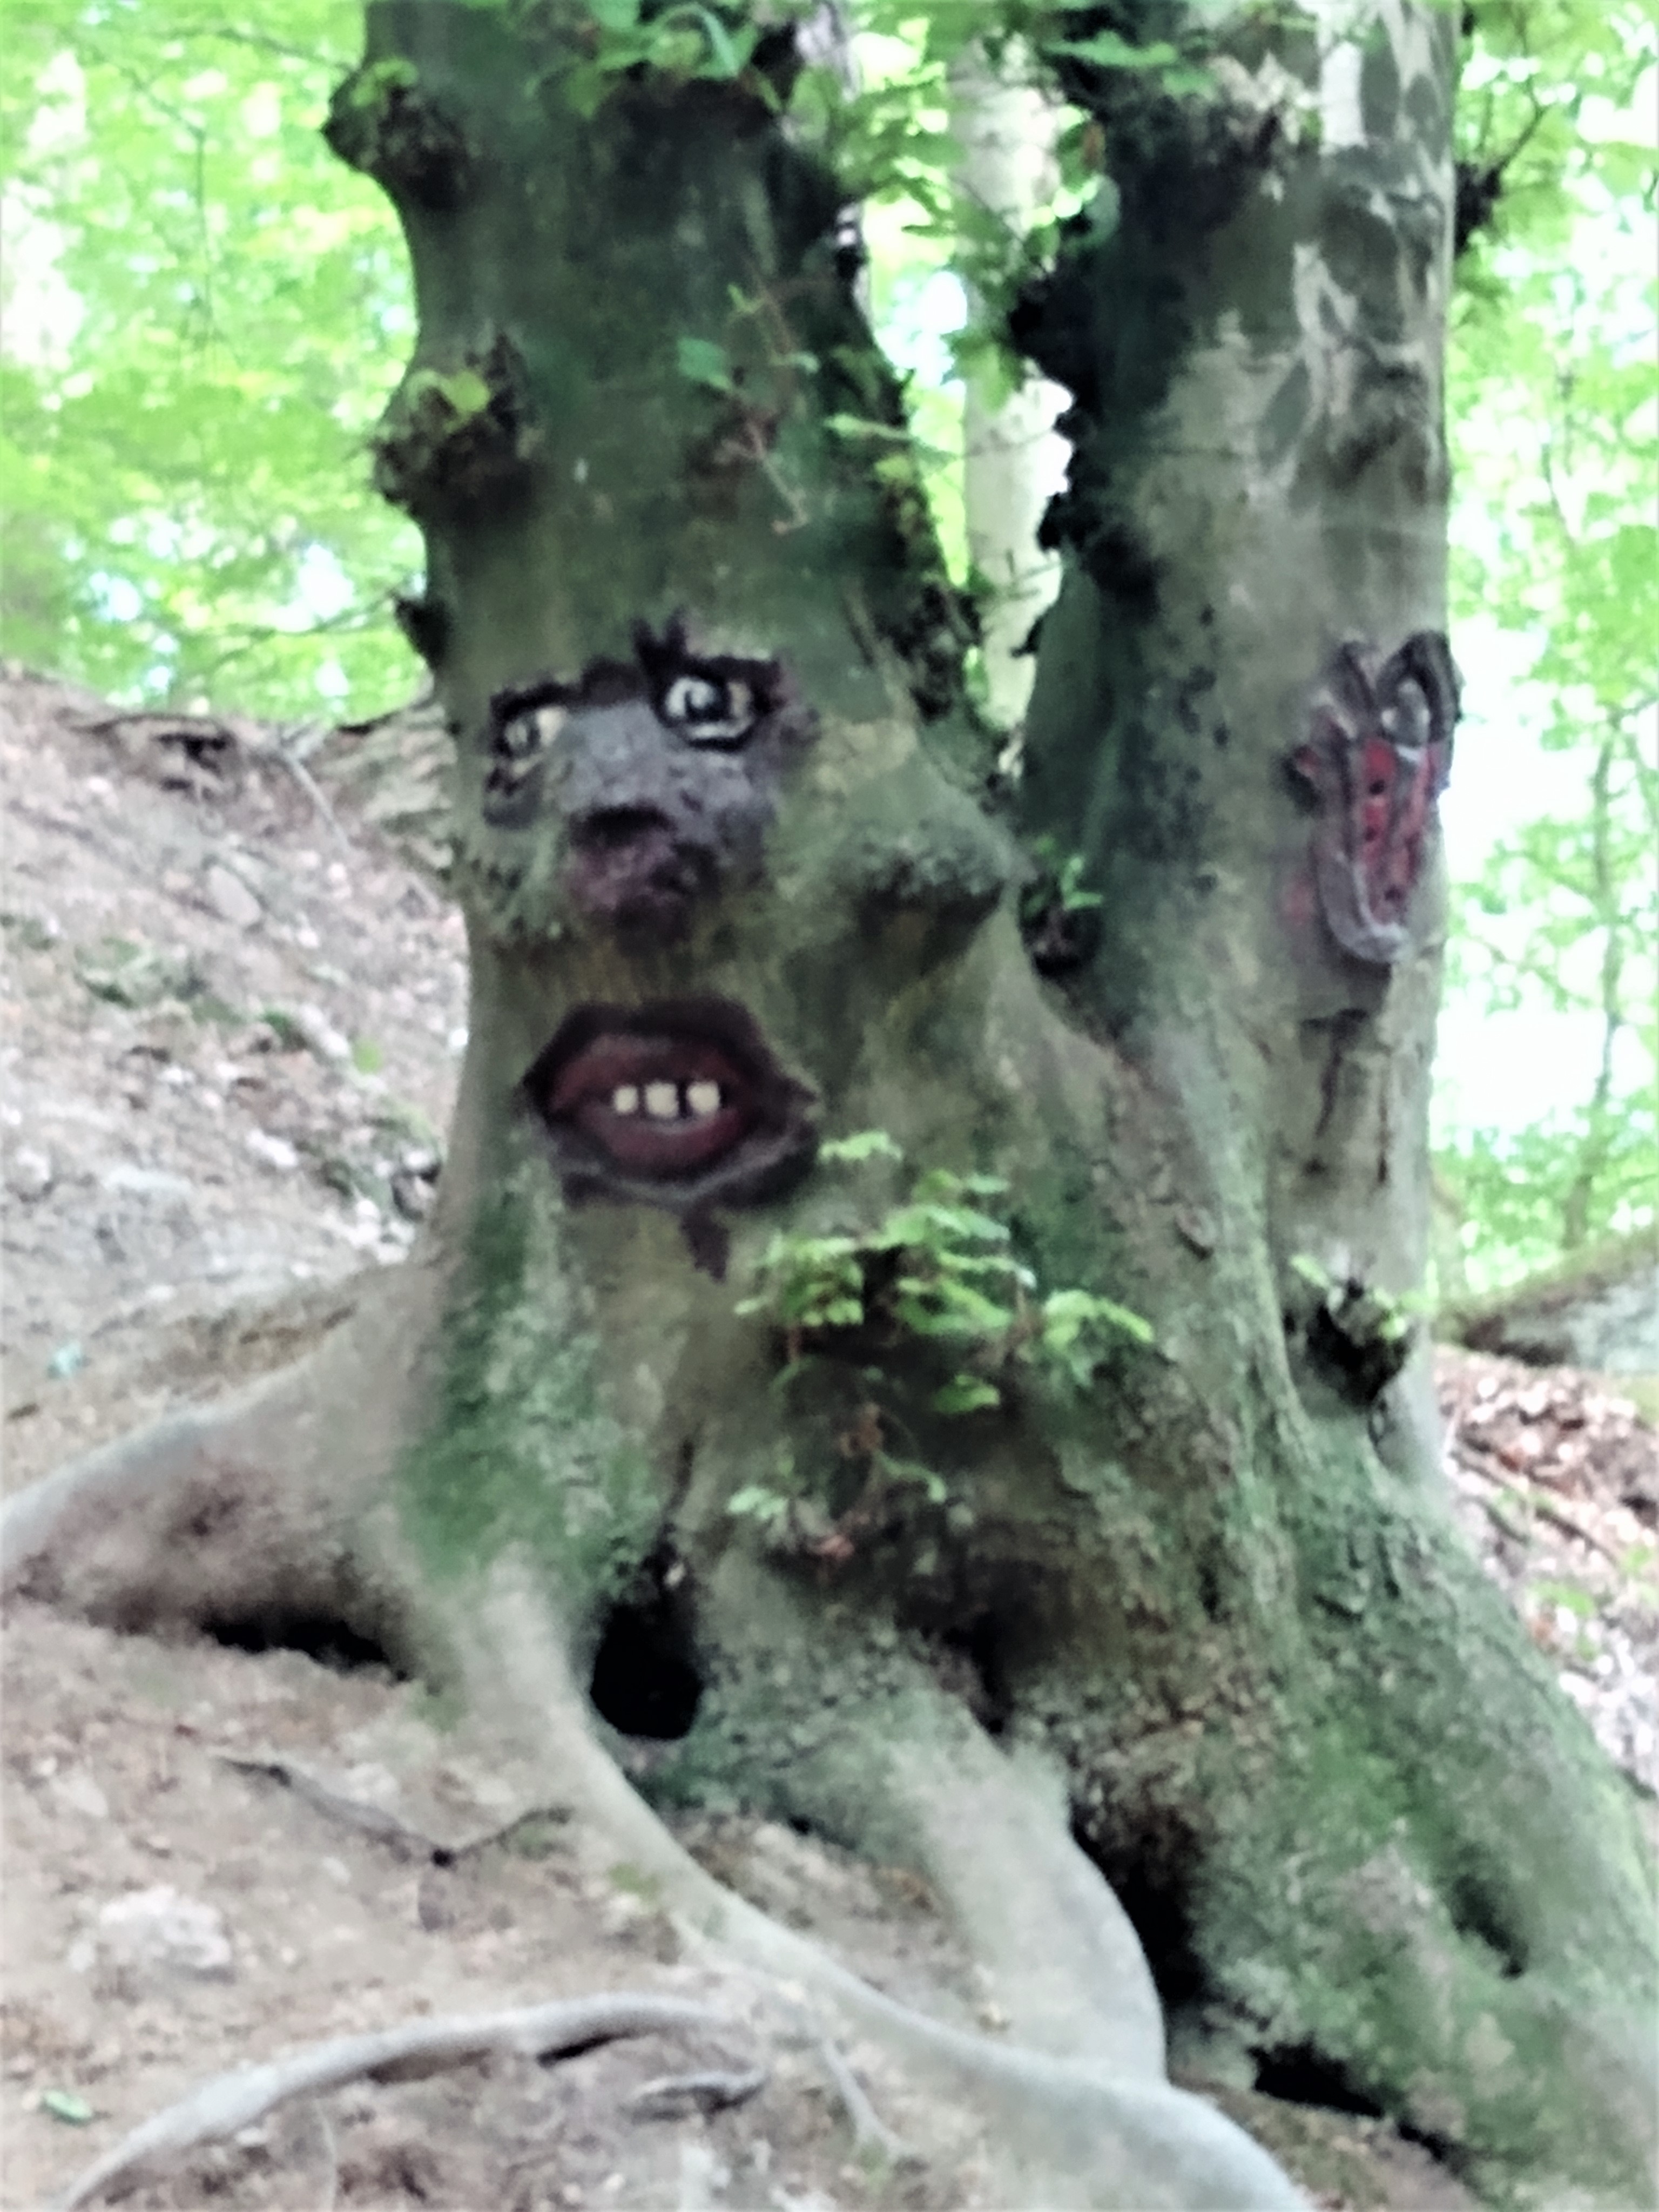 Forest Walks - Tree Face Forest, Wiesbaden, TravelsWithSuz.com